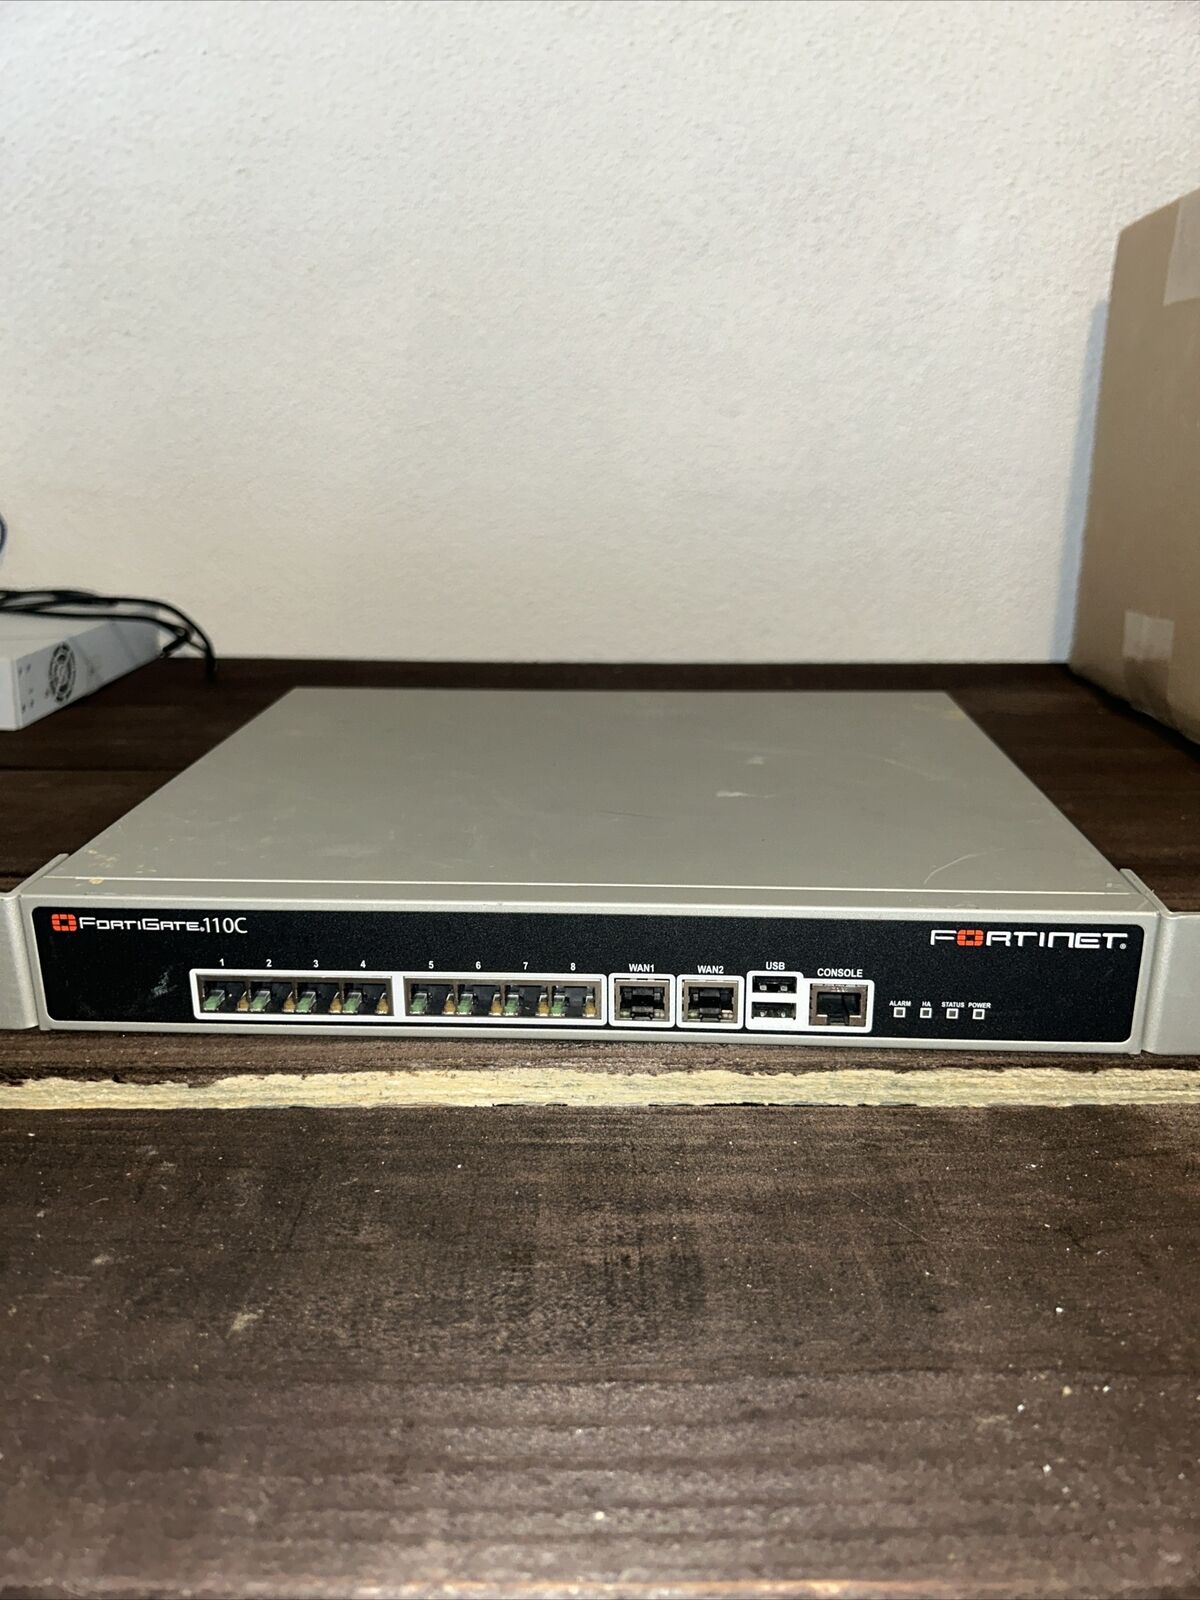 Fortinet Fortigate-110C FG-110C 8-Port Network Firewall Not Tested No Power Cord